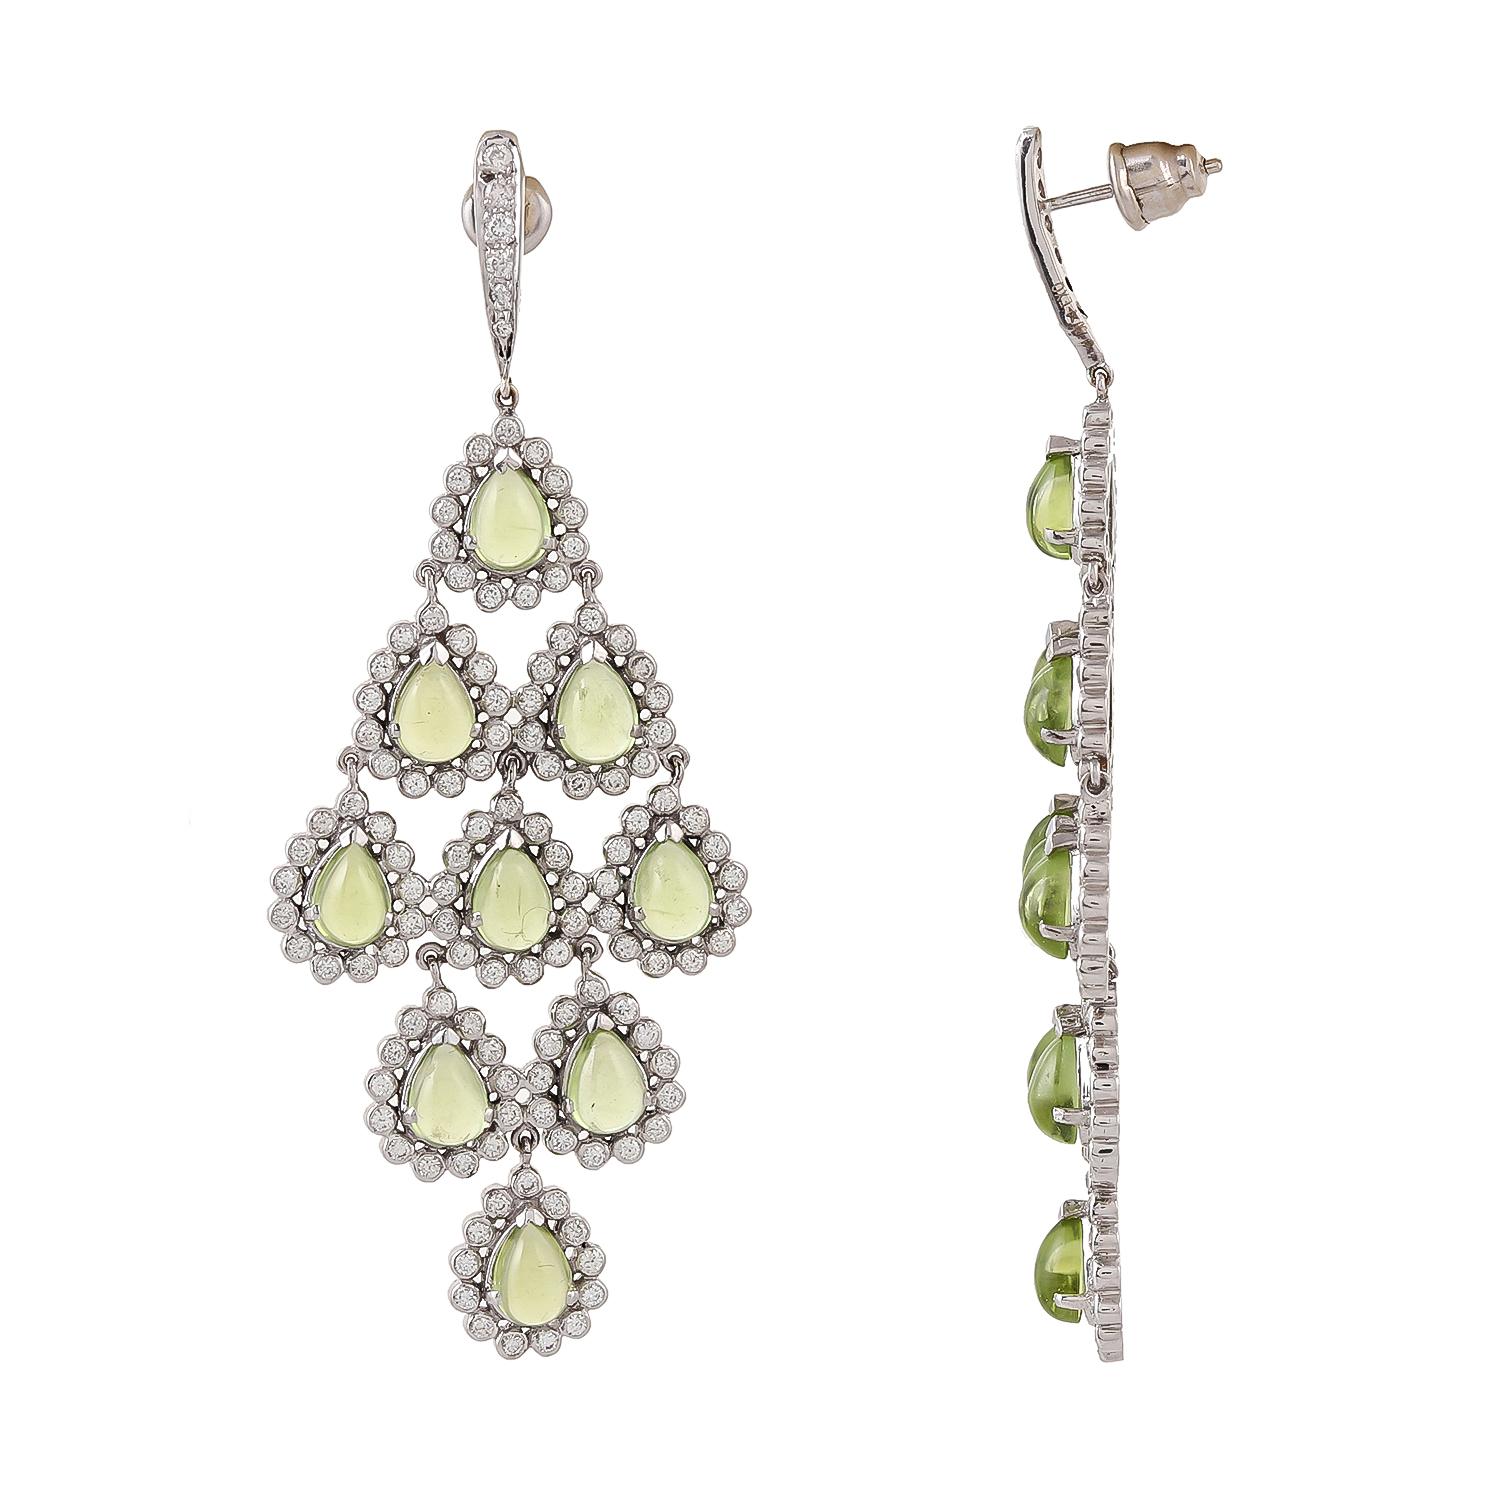 Perfectly cut 16.90 peridot cabochons pear shapes are set in such an orderly manner. These Chandeliers are in 18kt white gold and bezel set 3.38ct diamonds.